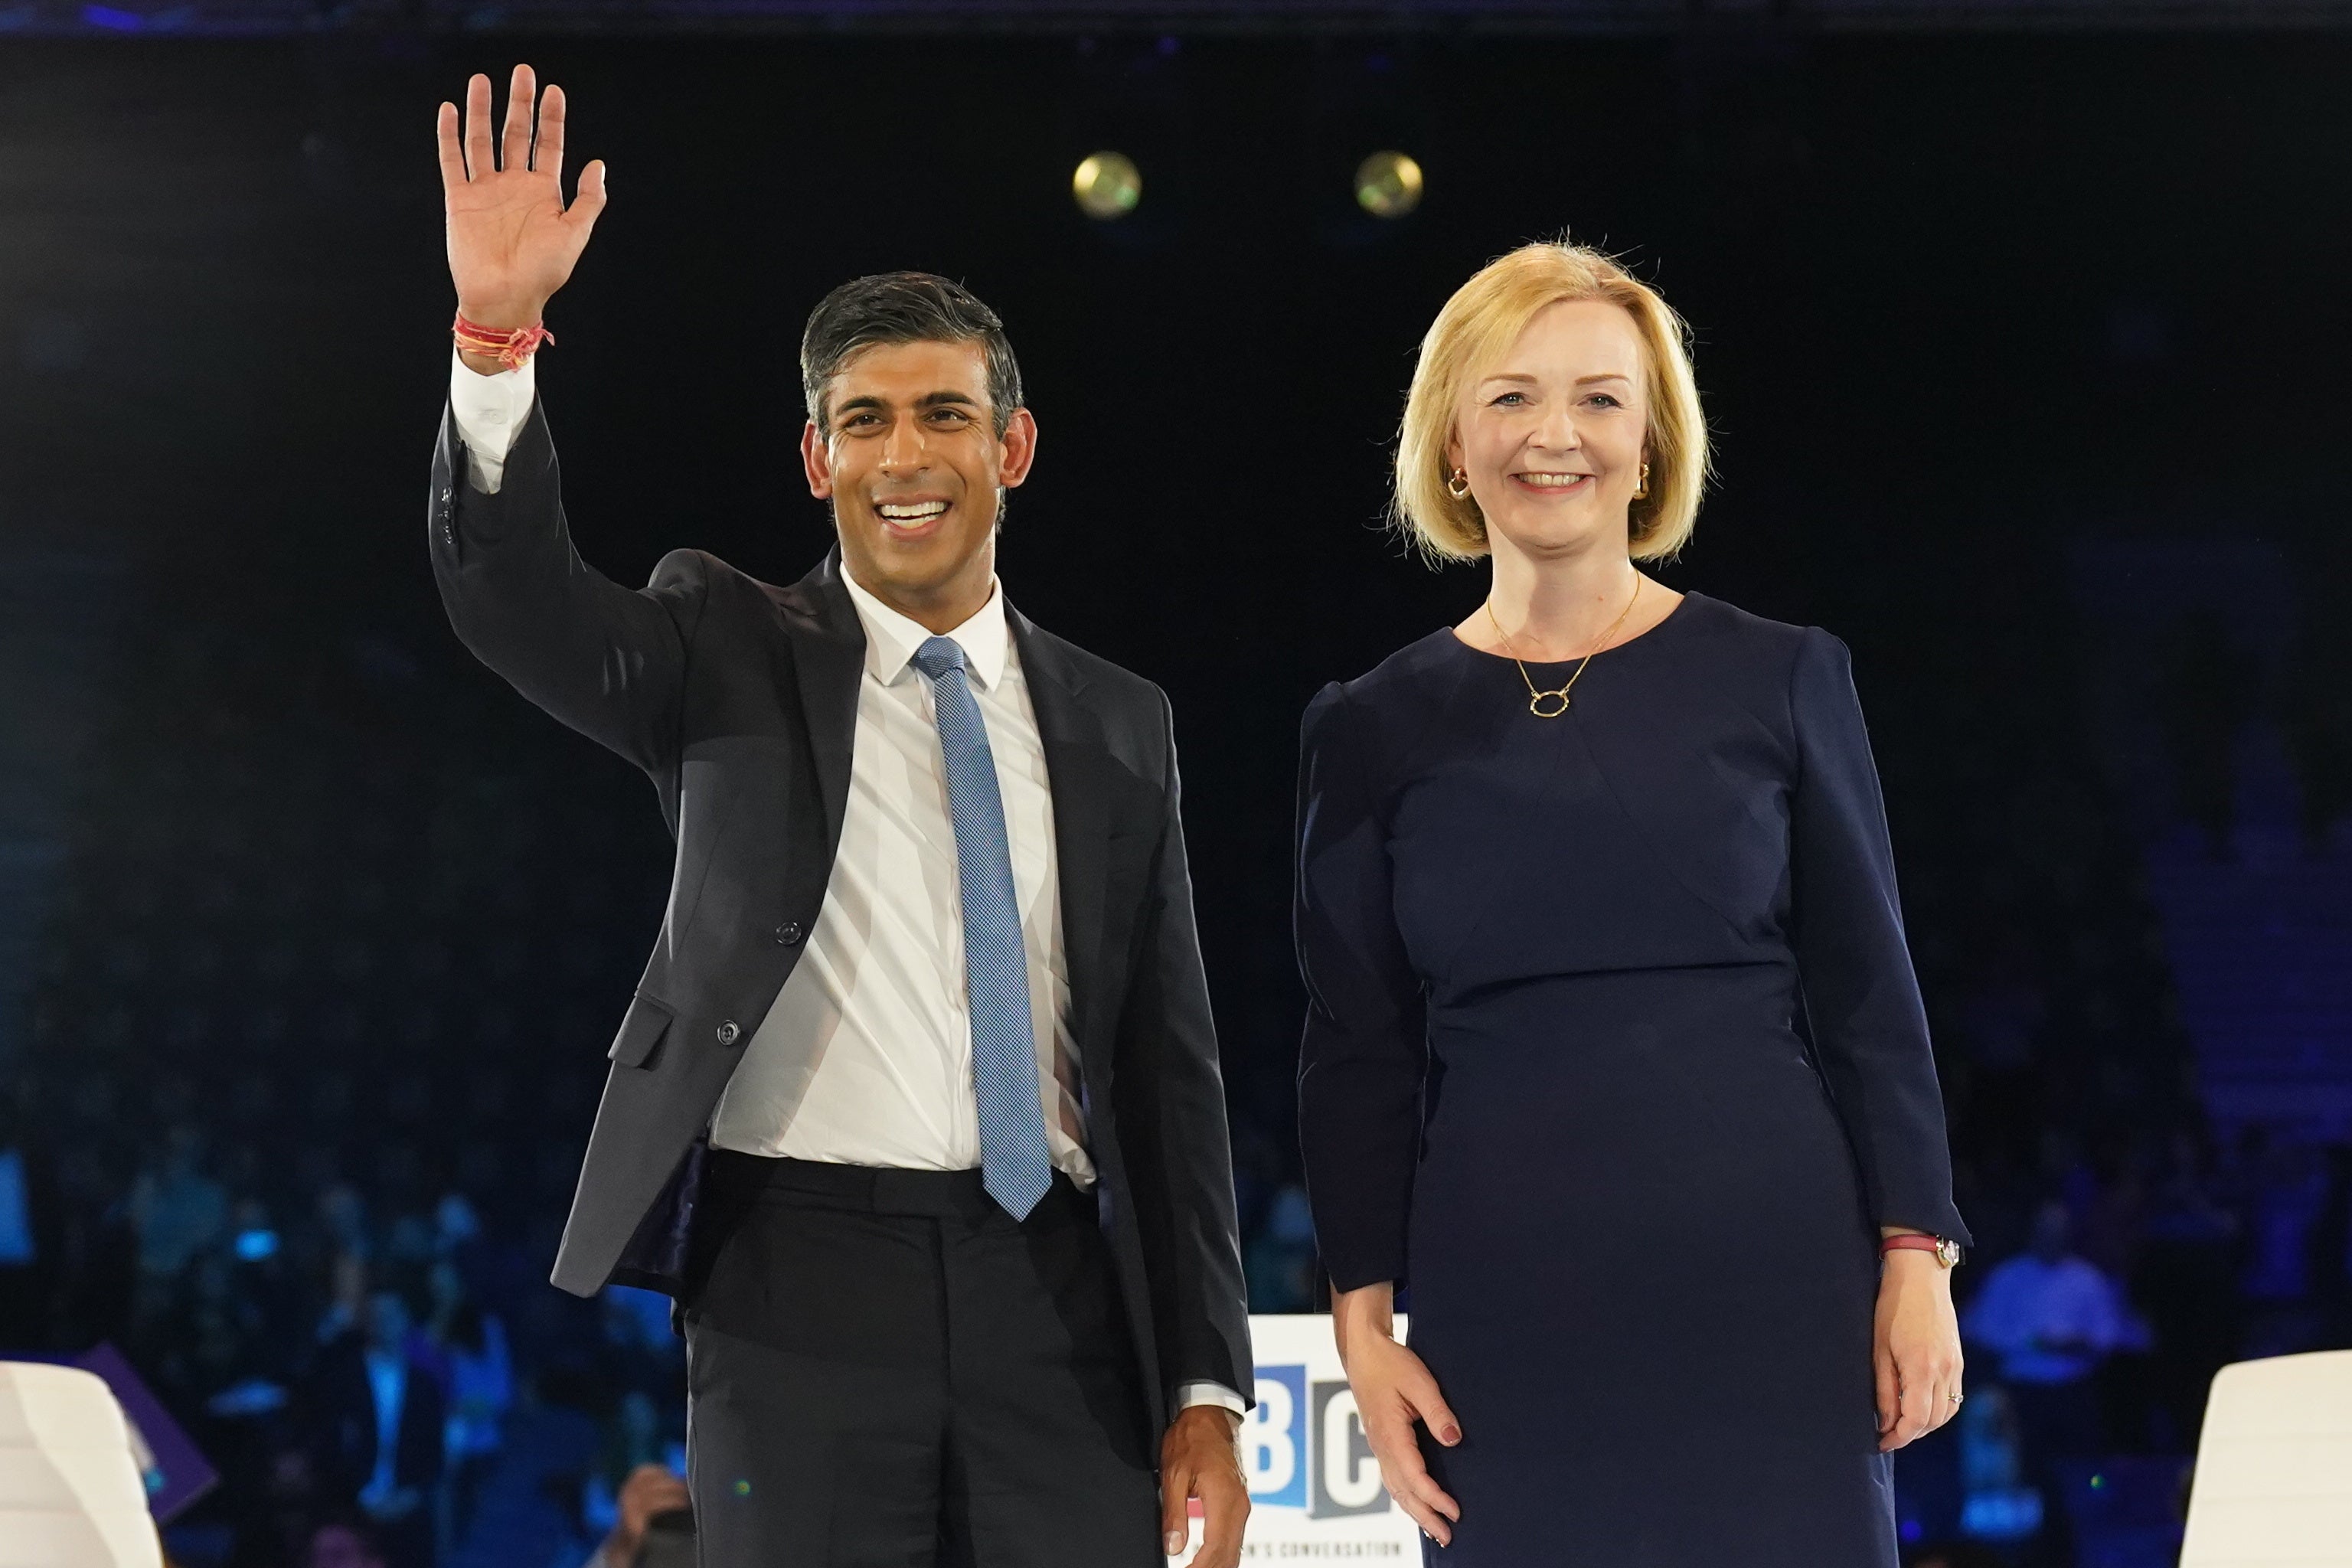 Rishi Sunak and Liz Truss during a hustings event at Wembley Arena (Stefan Rousseau/PA)